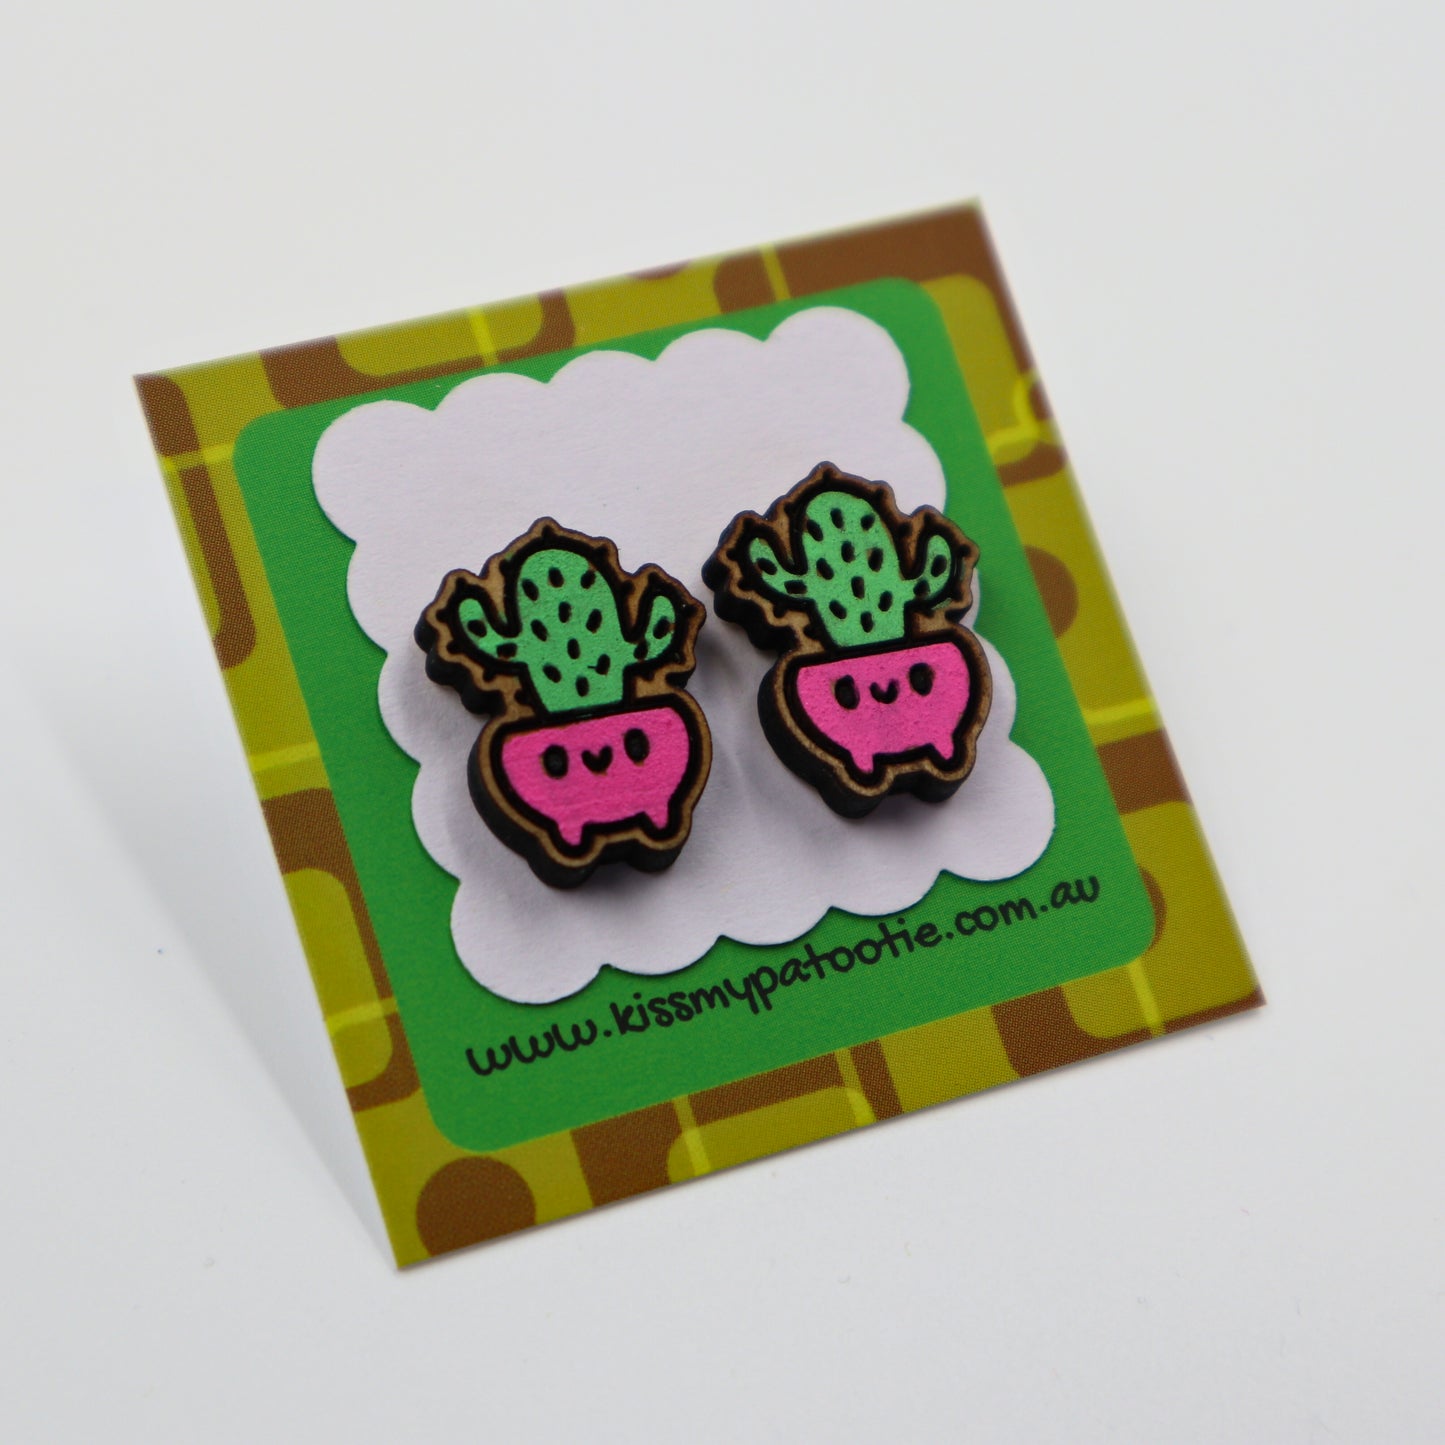 Succulent / cactus wooden earrings - hand painted